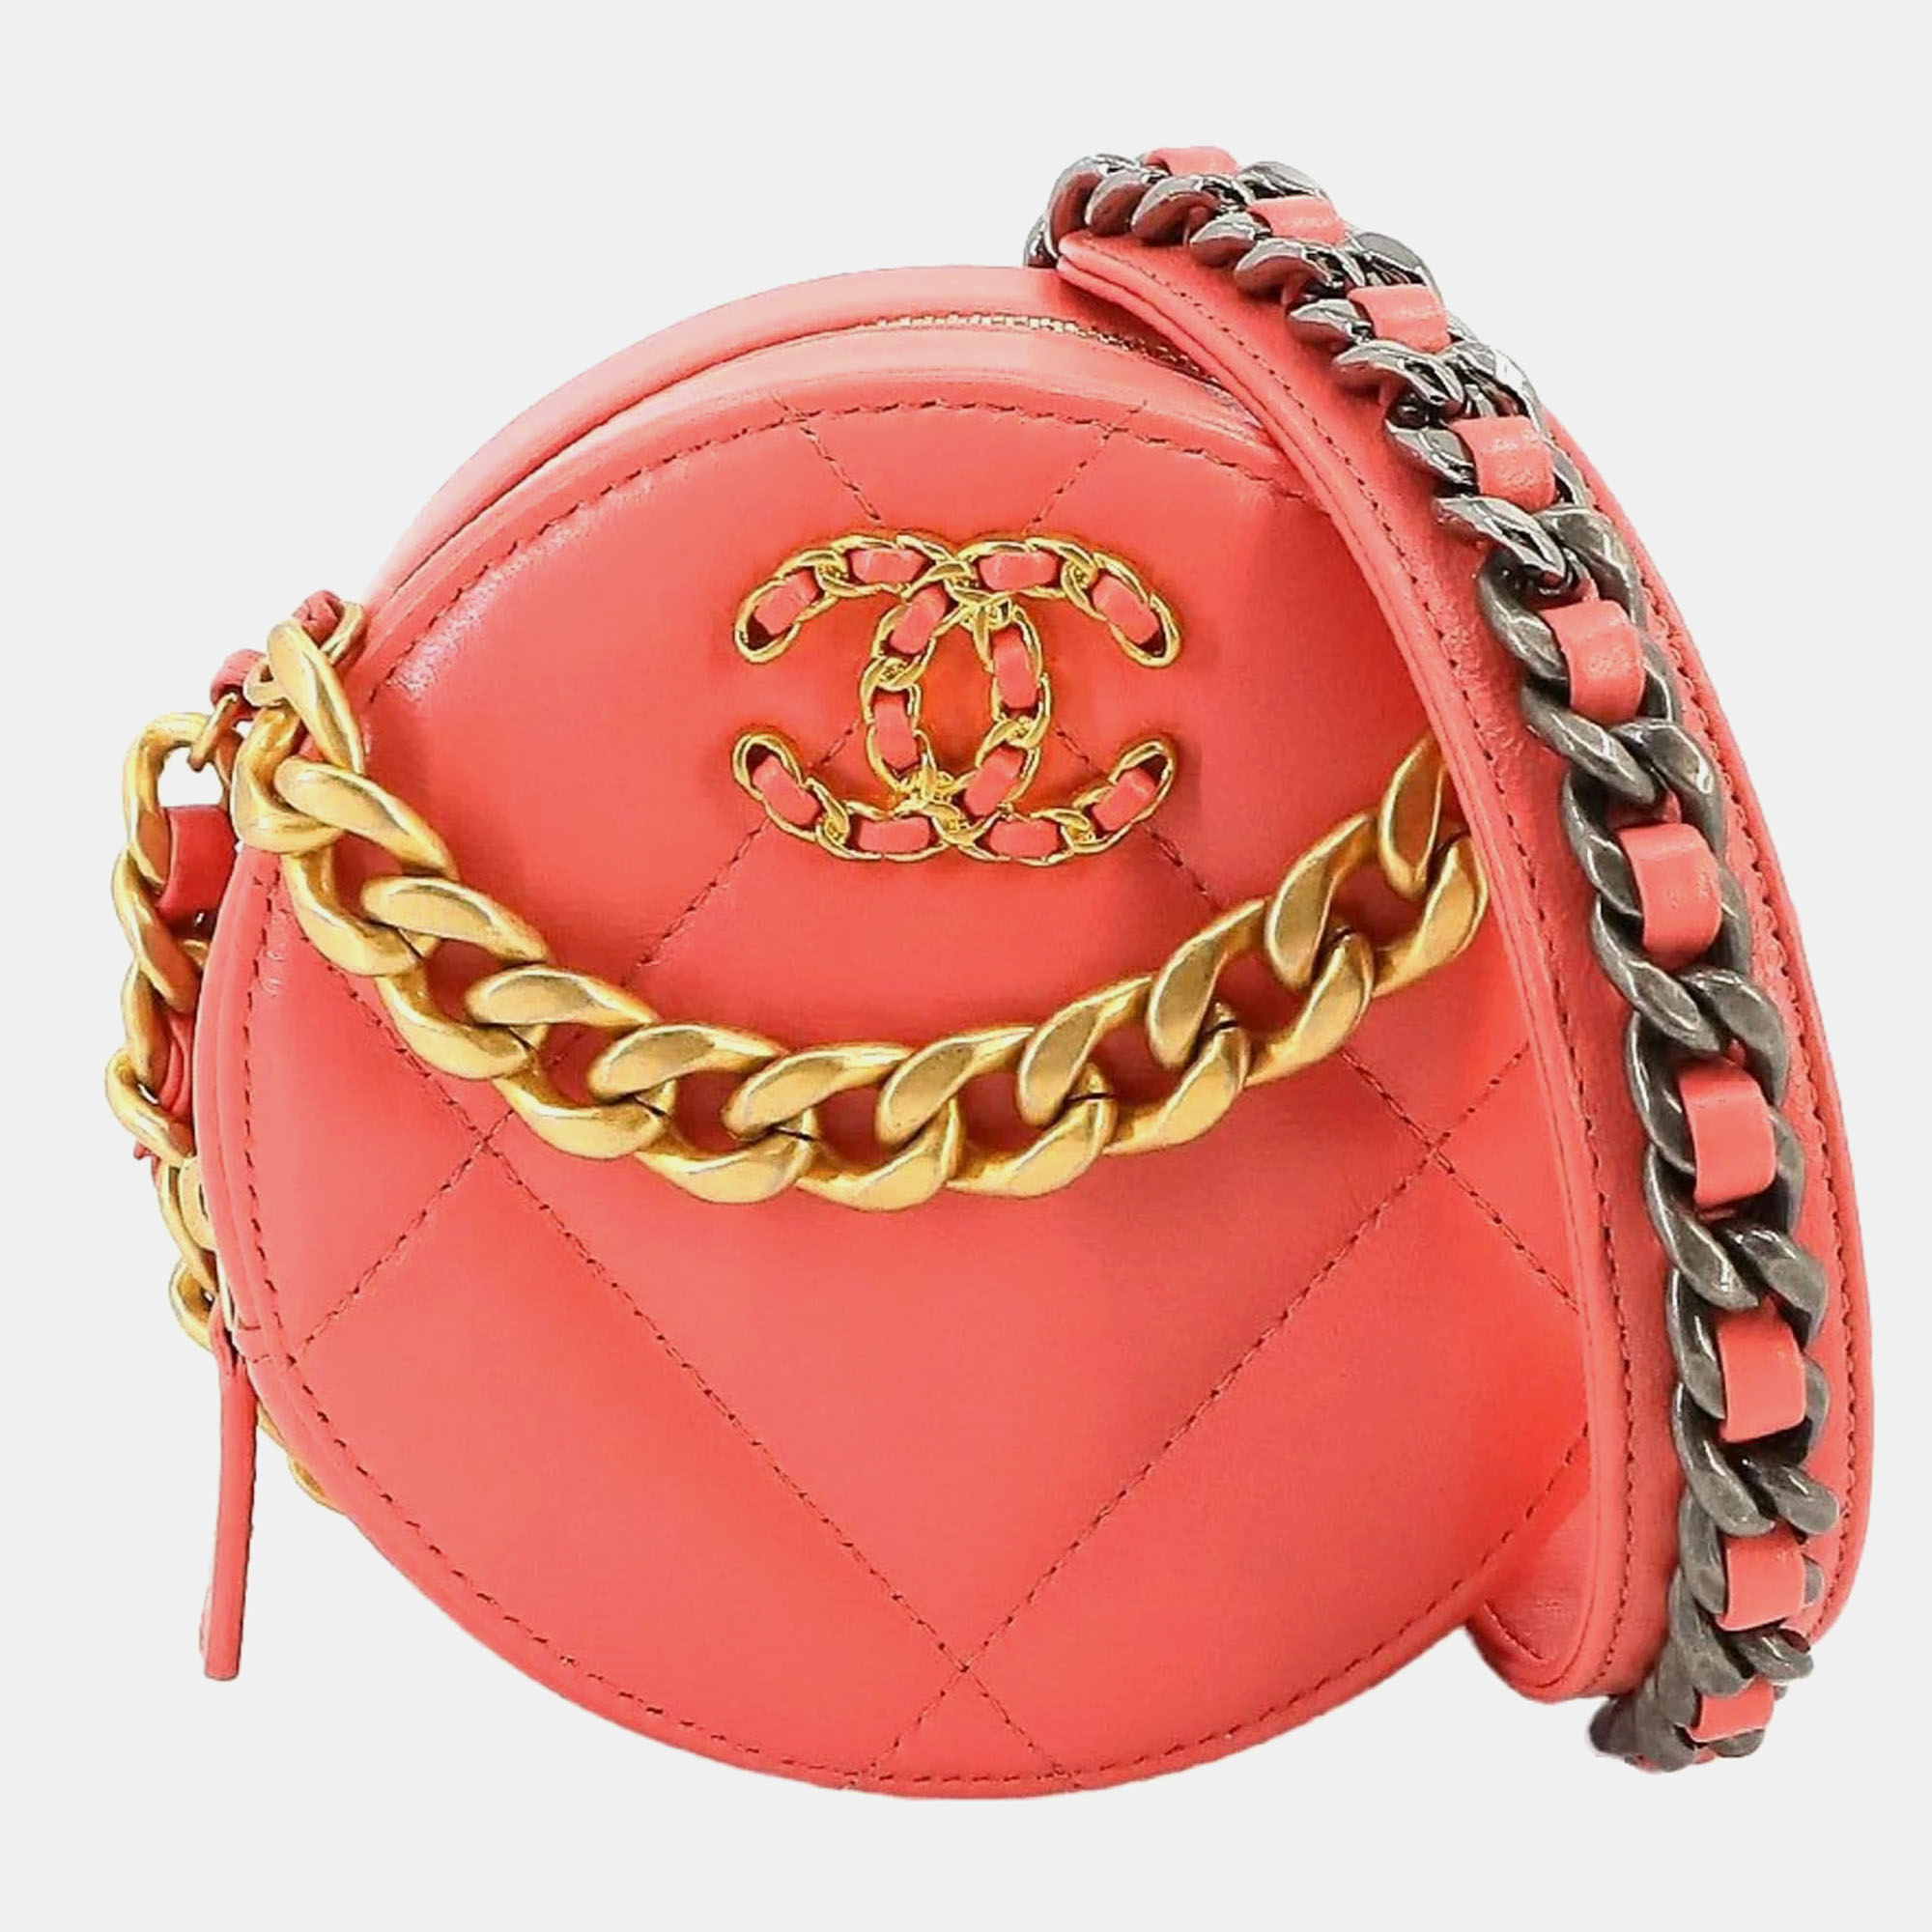 Chanel peach quilted leather 19 round clutch with chain